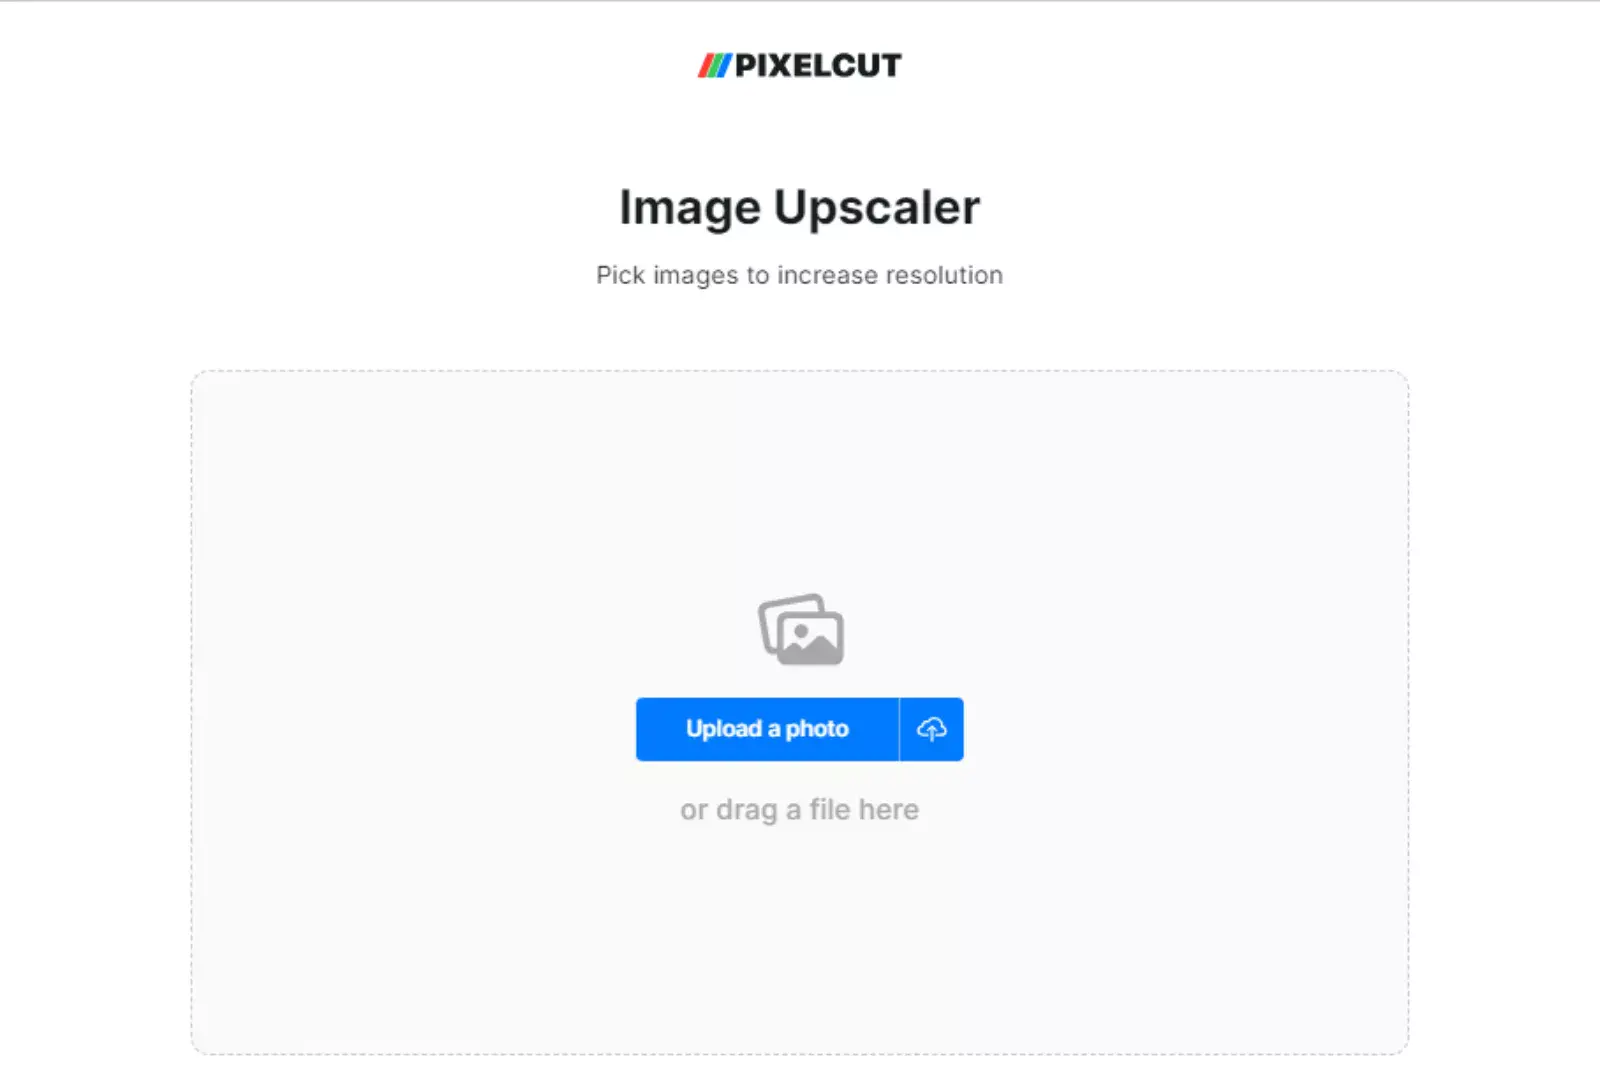 Home Page of Pixelcut